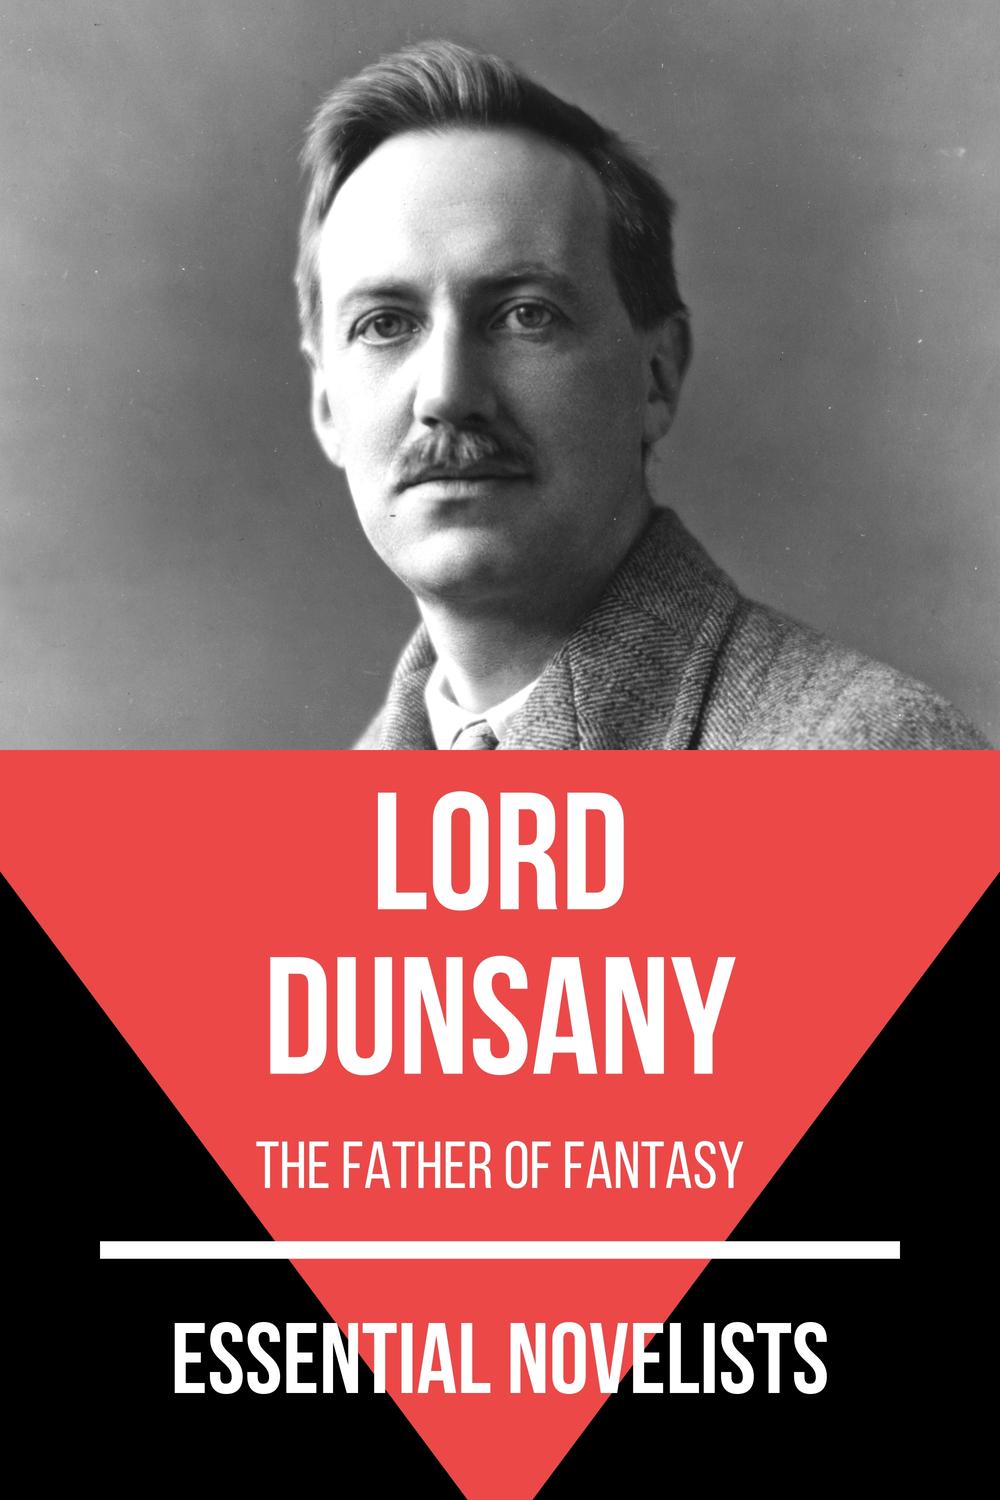 Essential Novelists - Lord Dunsany - Lord Dunsany